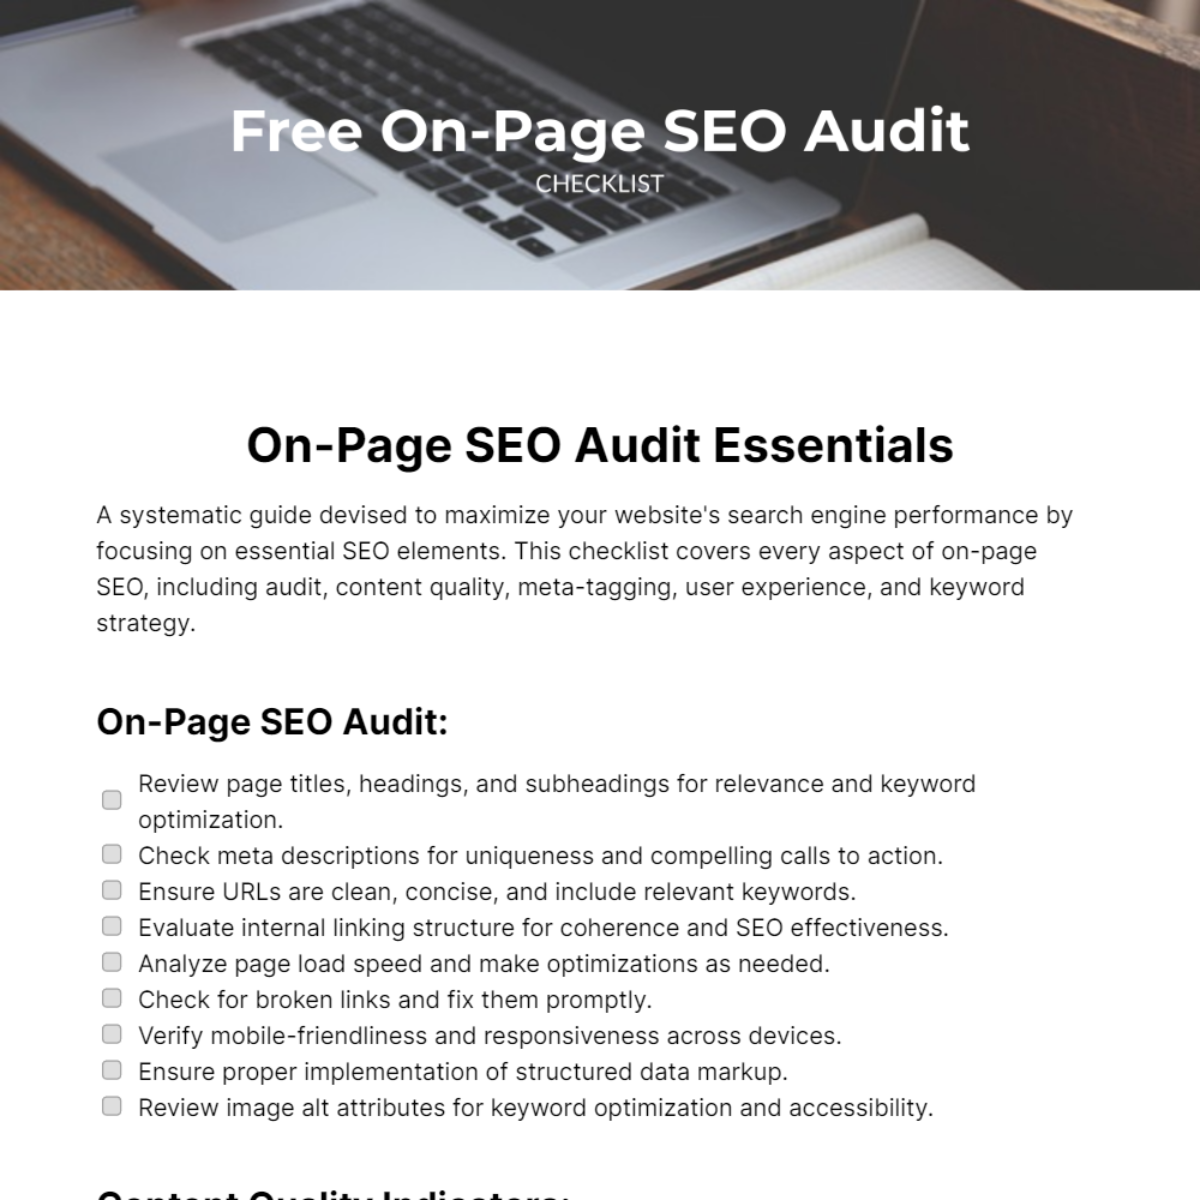 Free On-Page SEO Audit Checklist Template